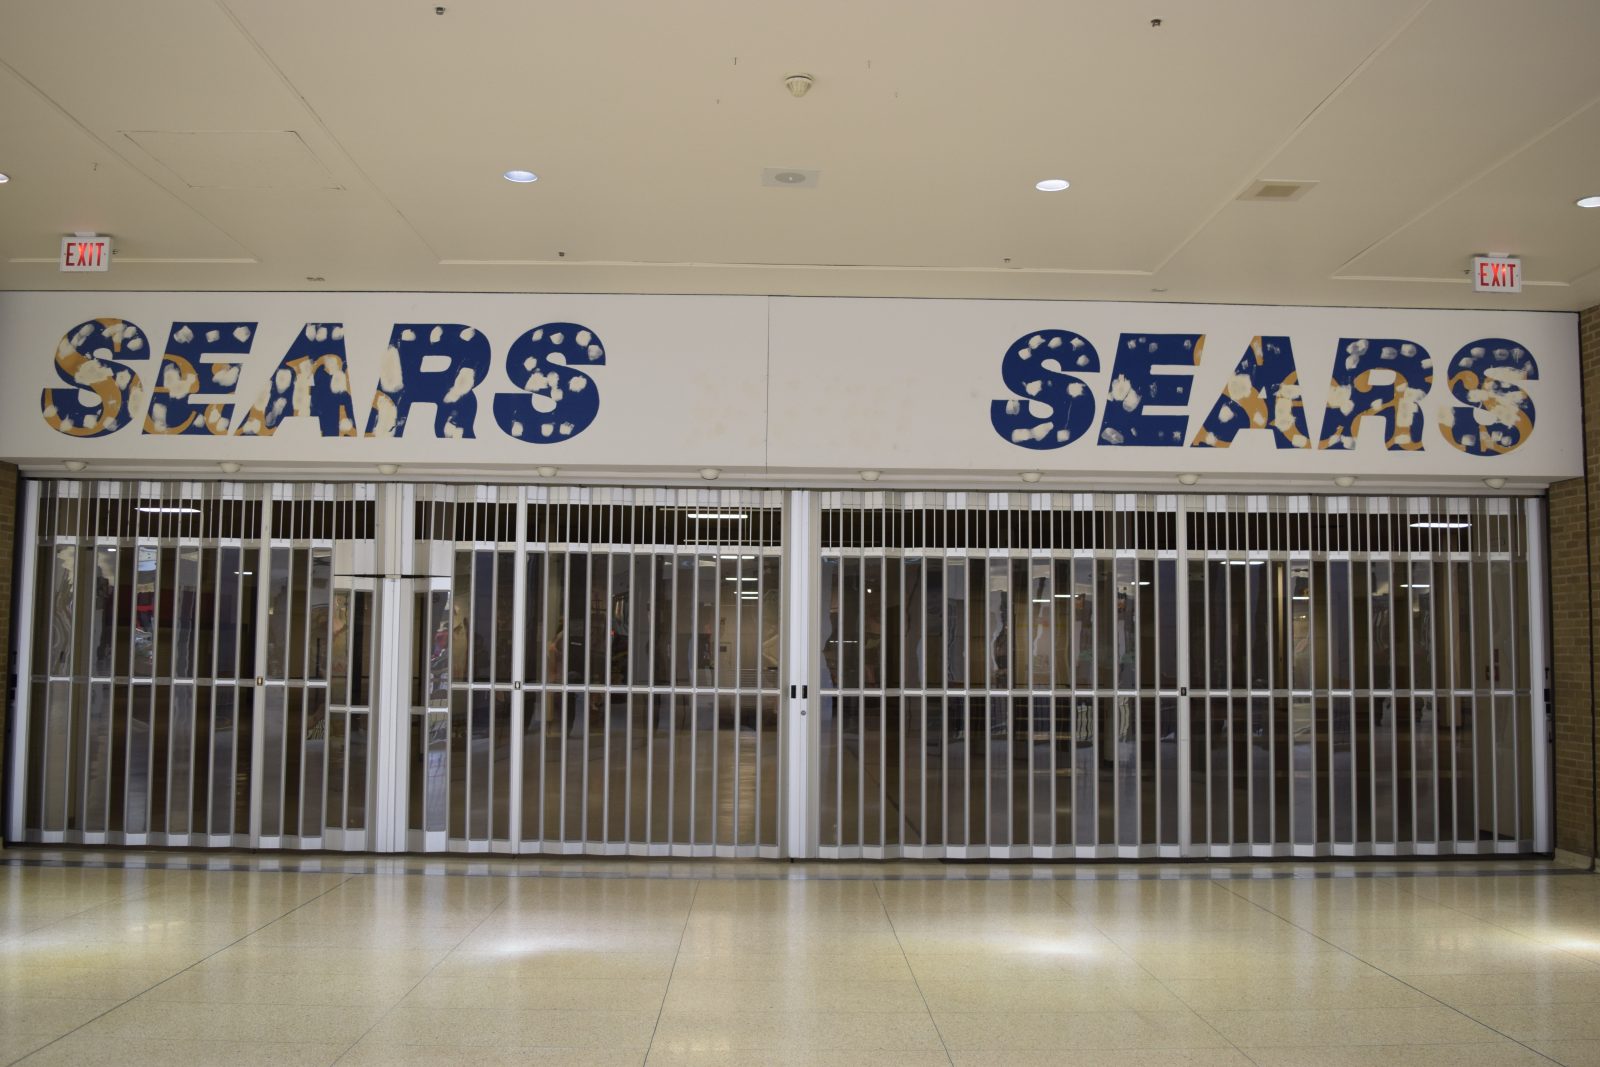 Sears to be torn down